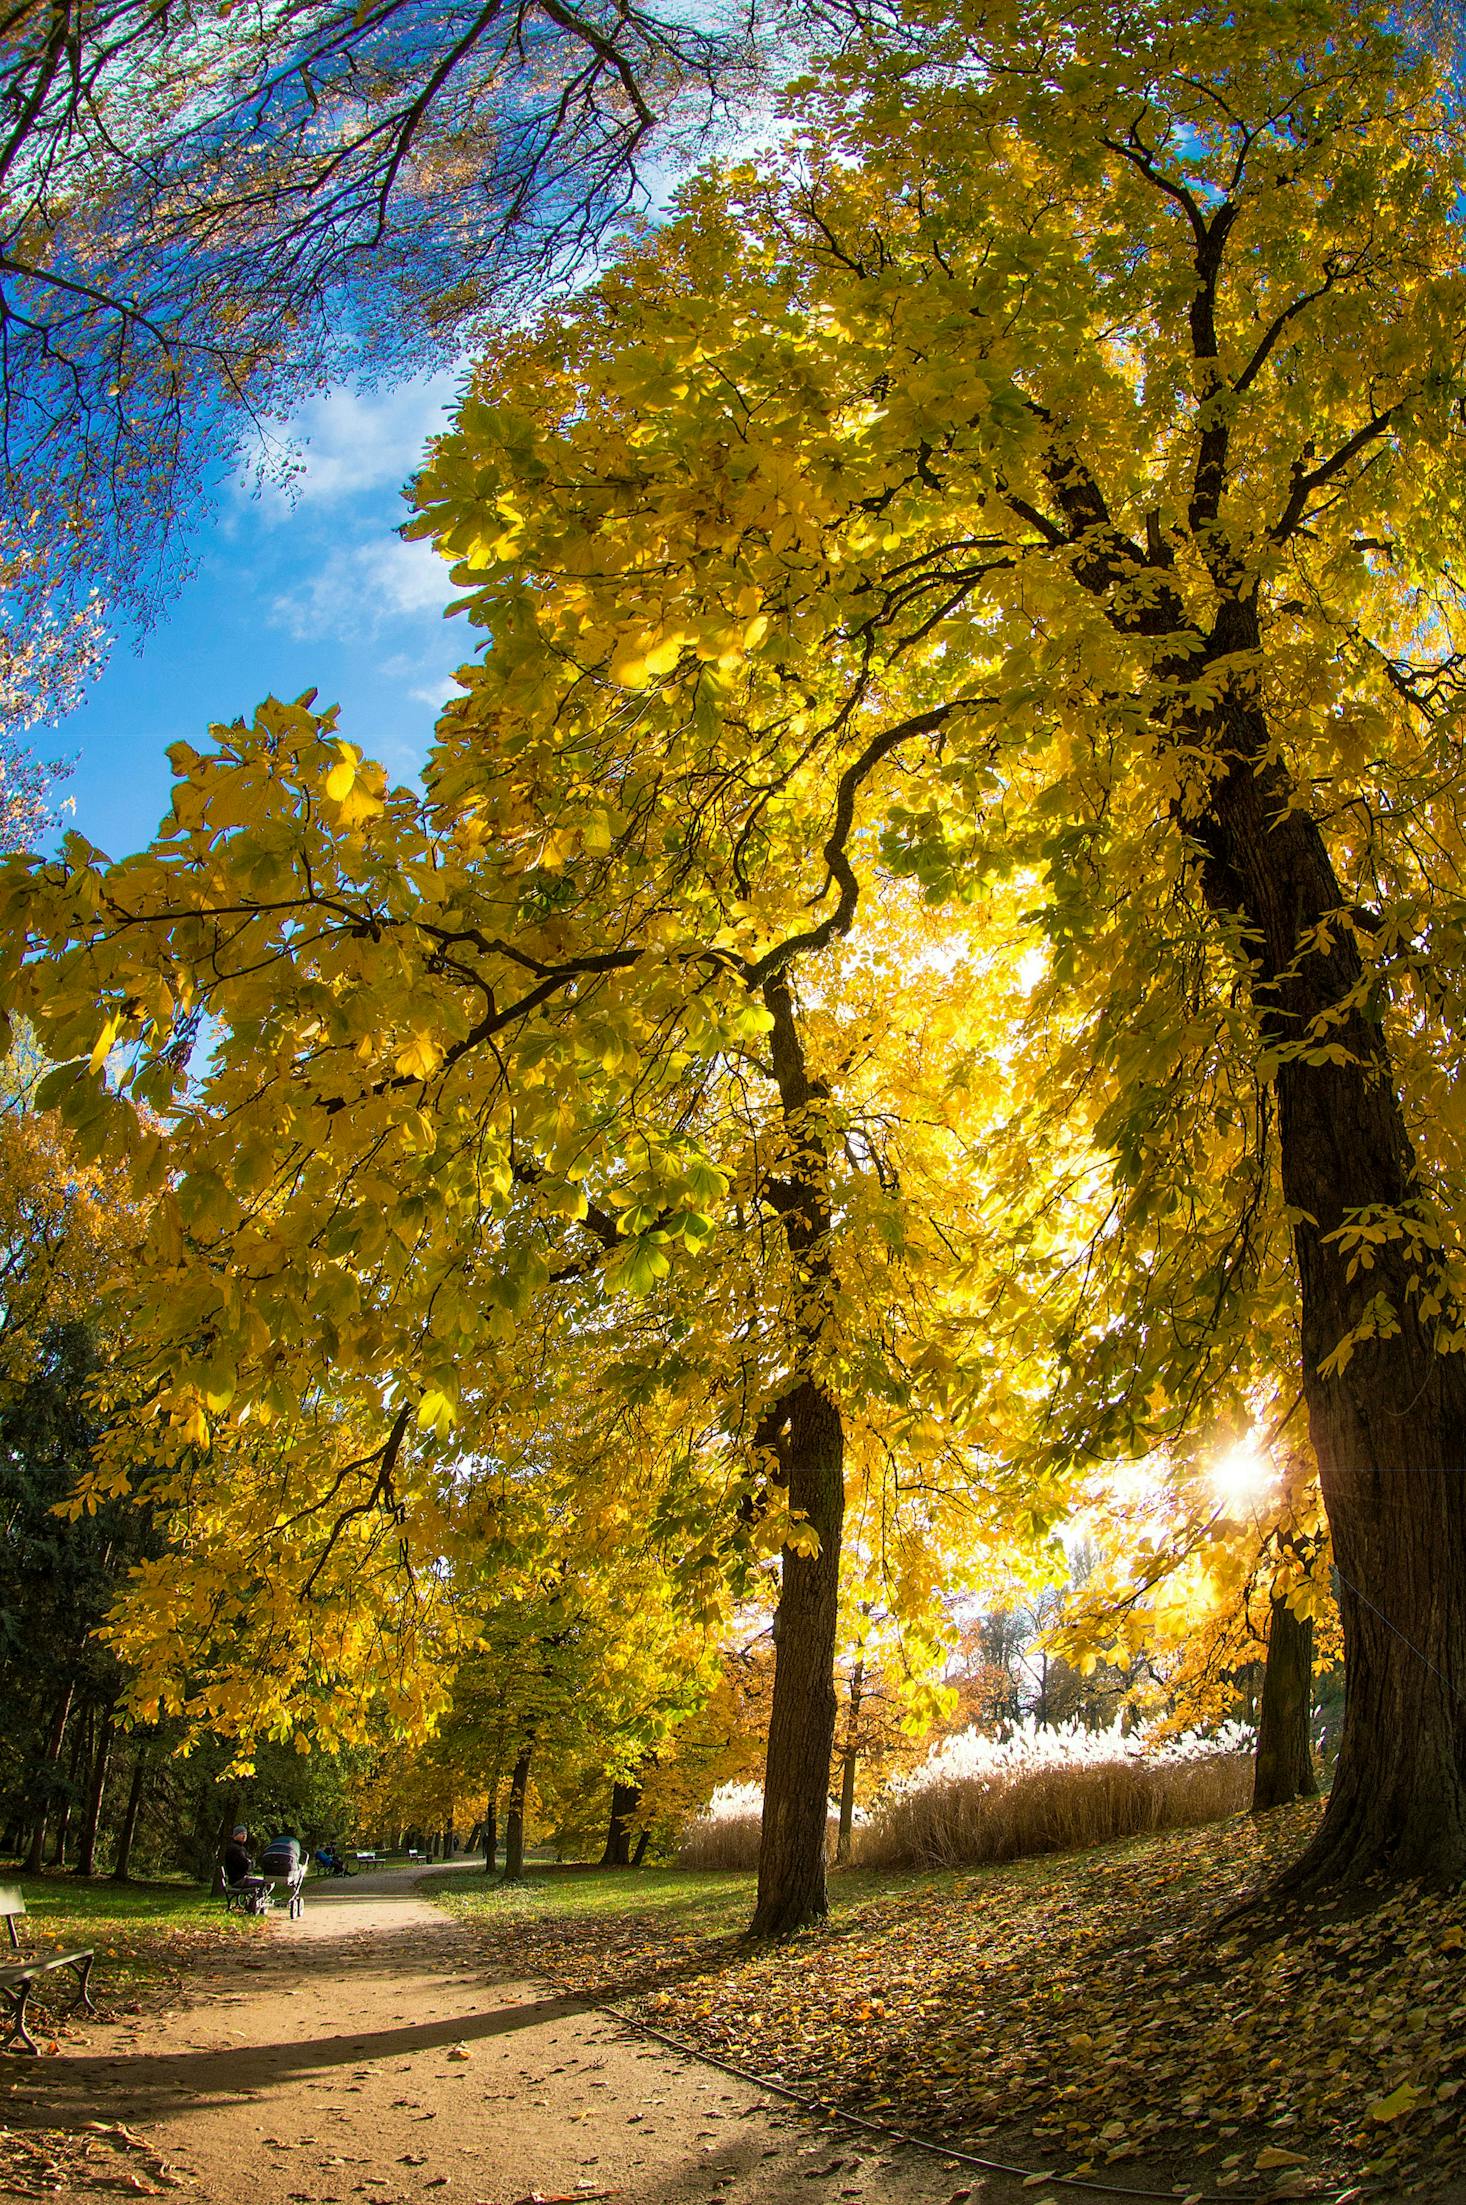 Tree lined path with bright yellow leaves on the trees and sunny sky